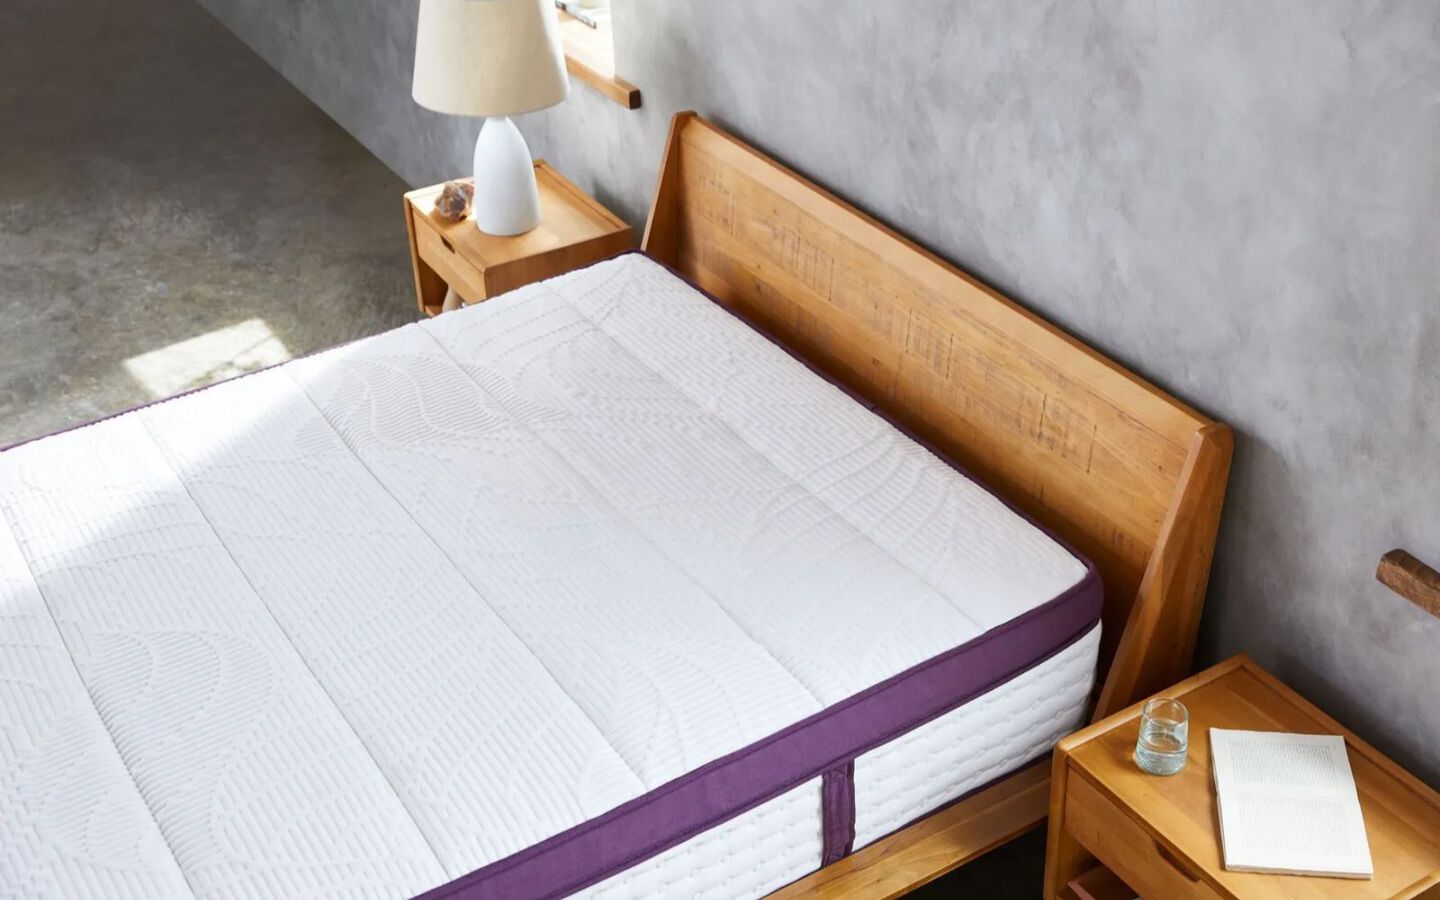 Aerial view of a purple and white mattress on top of wooden bedframe